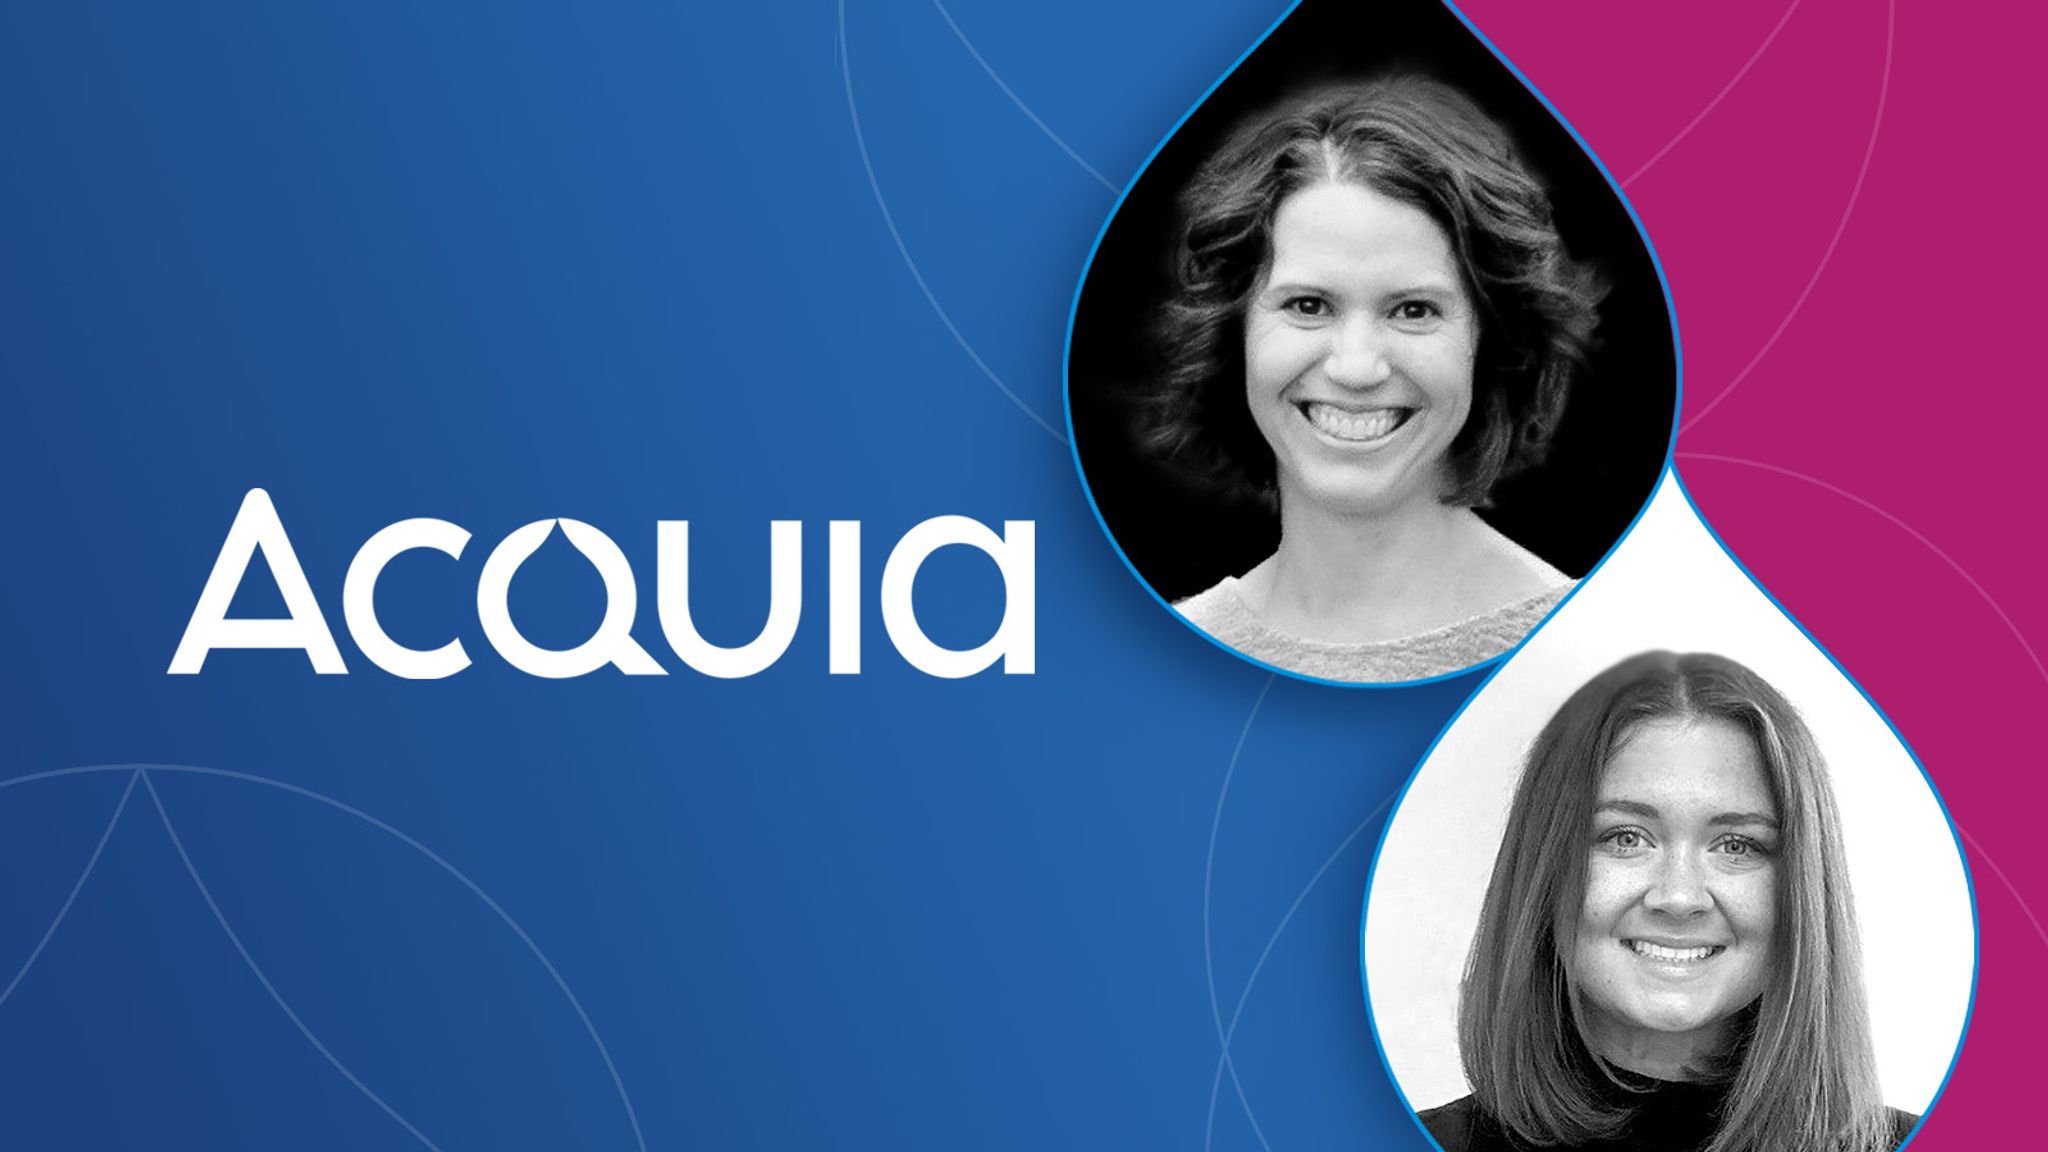 Acquia logo with inset images of Deanna and Maggie in shapes of the Drupal logo icon - a water droplet.